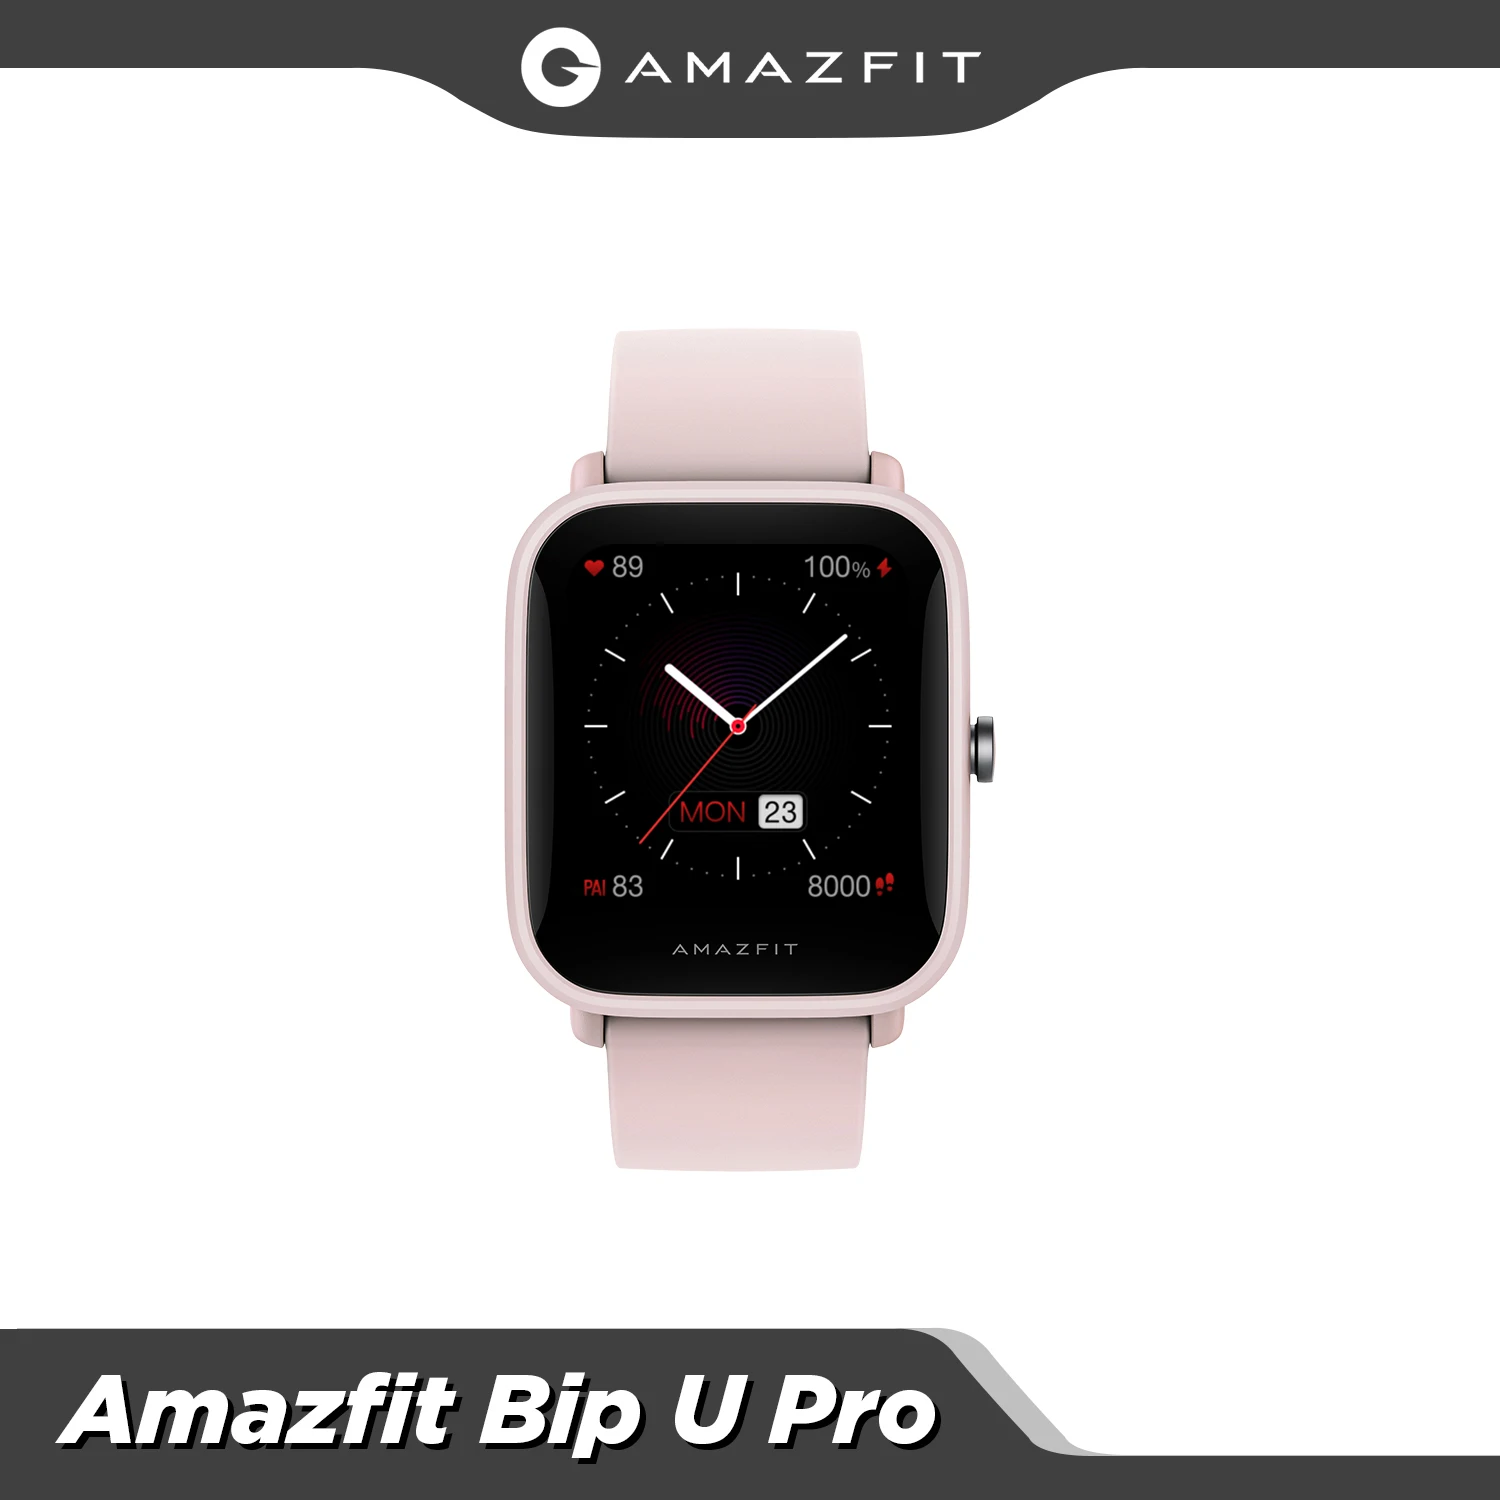 Original Global Amazfit Bip U Pro Smartwatch 1.43 inch 50 Watch Faces Color Screen GPS Smart Watch For Android iOS Phone